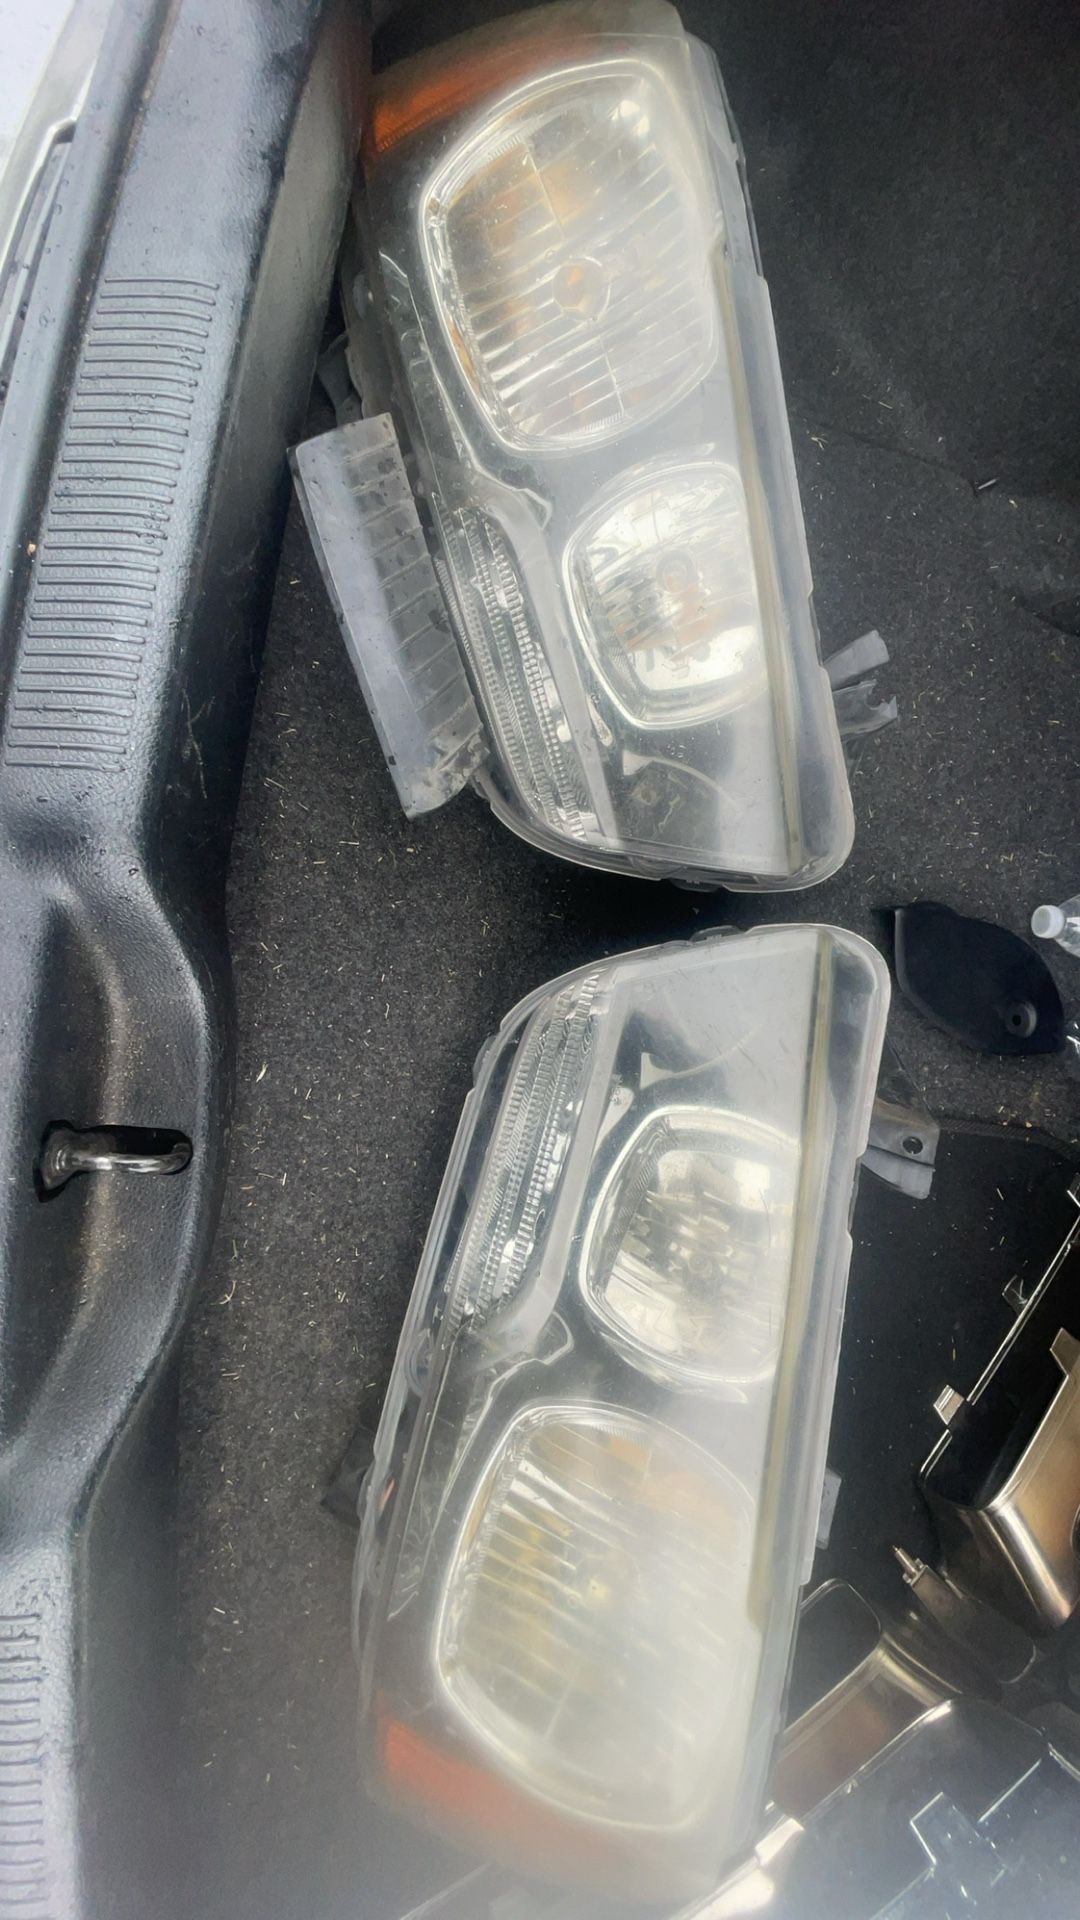 Charger 2012 Head Lights 